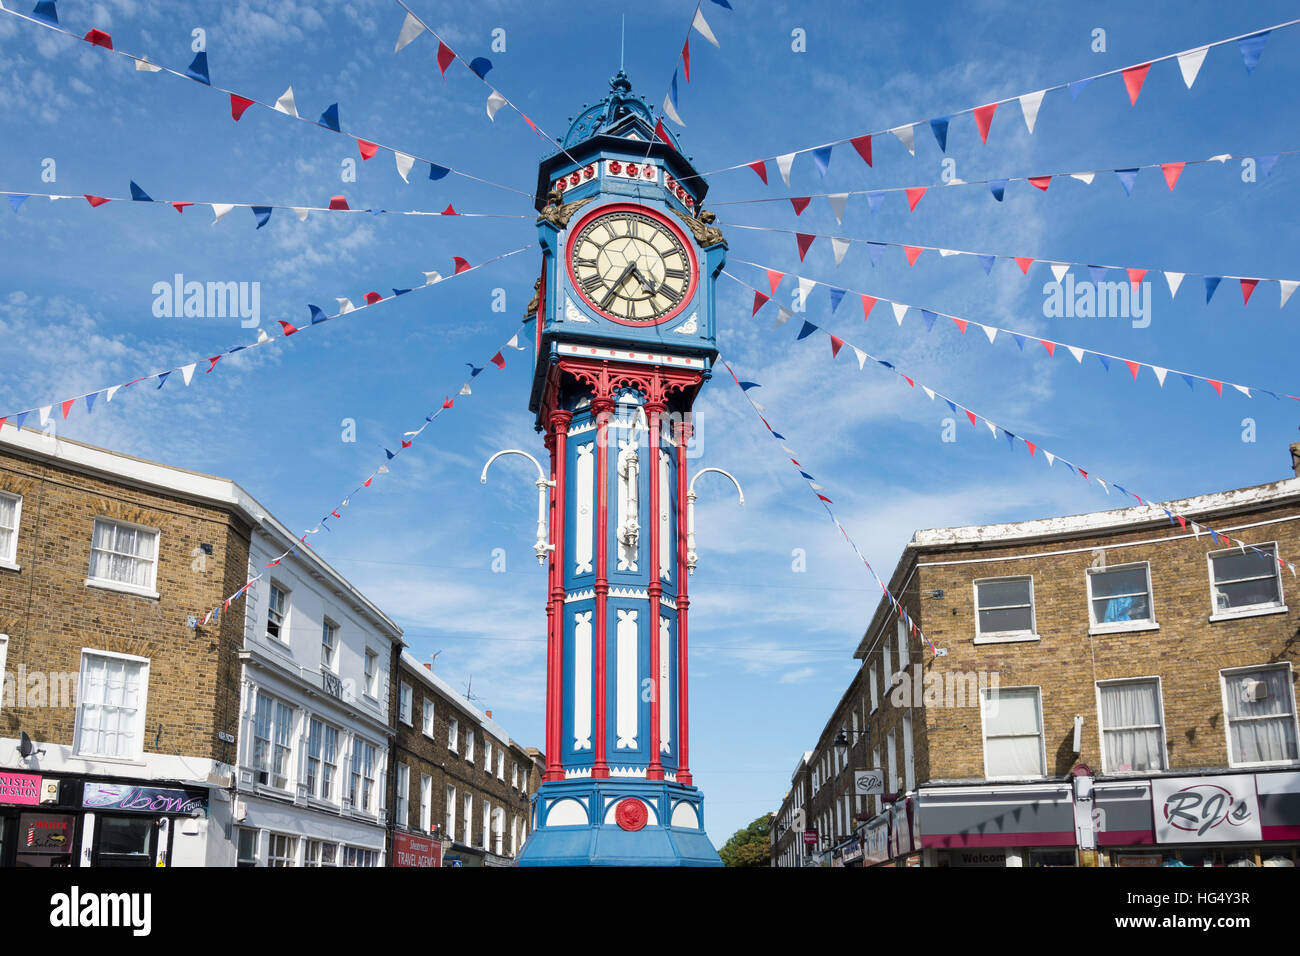 Sheerness Clock Tower, High Street, Sheerness, Isle of Sheppey, Kent, England, United Kingdom Stock Photo